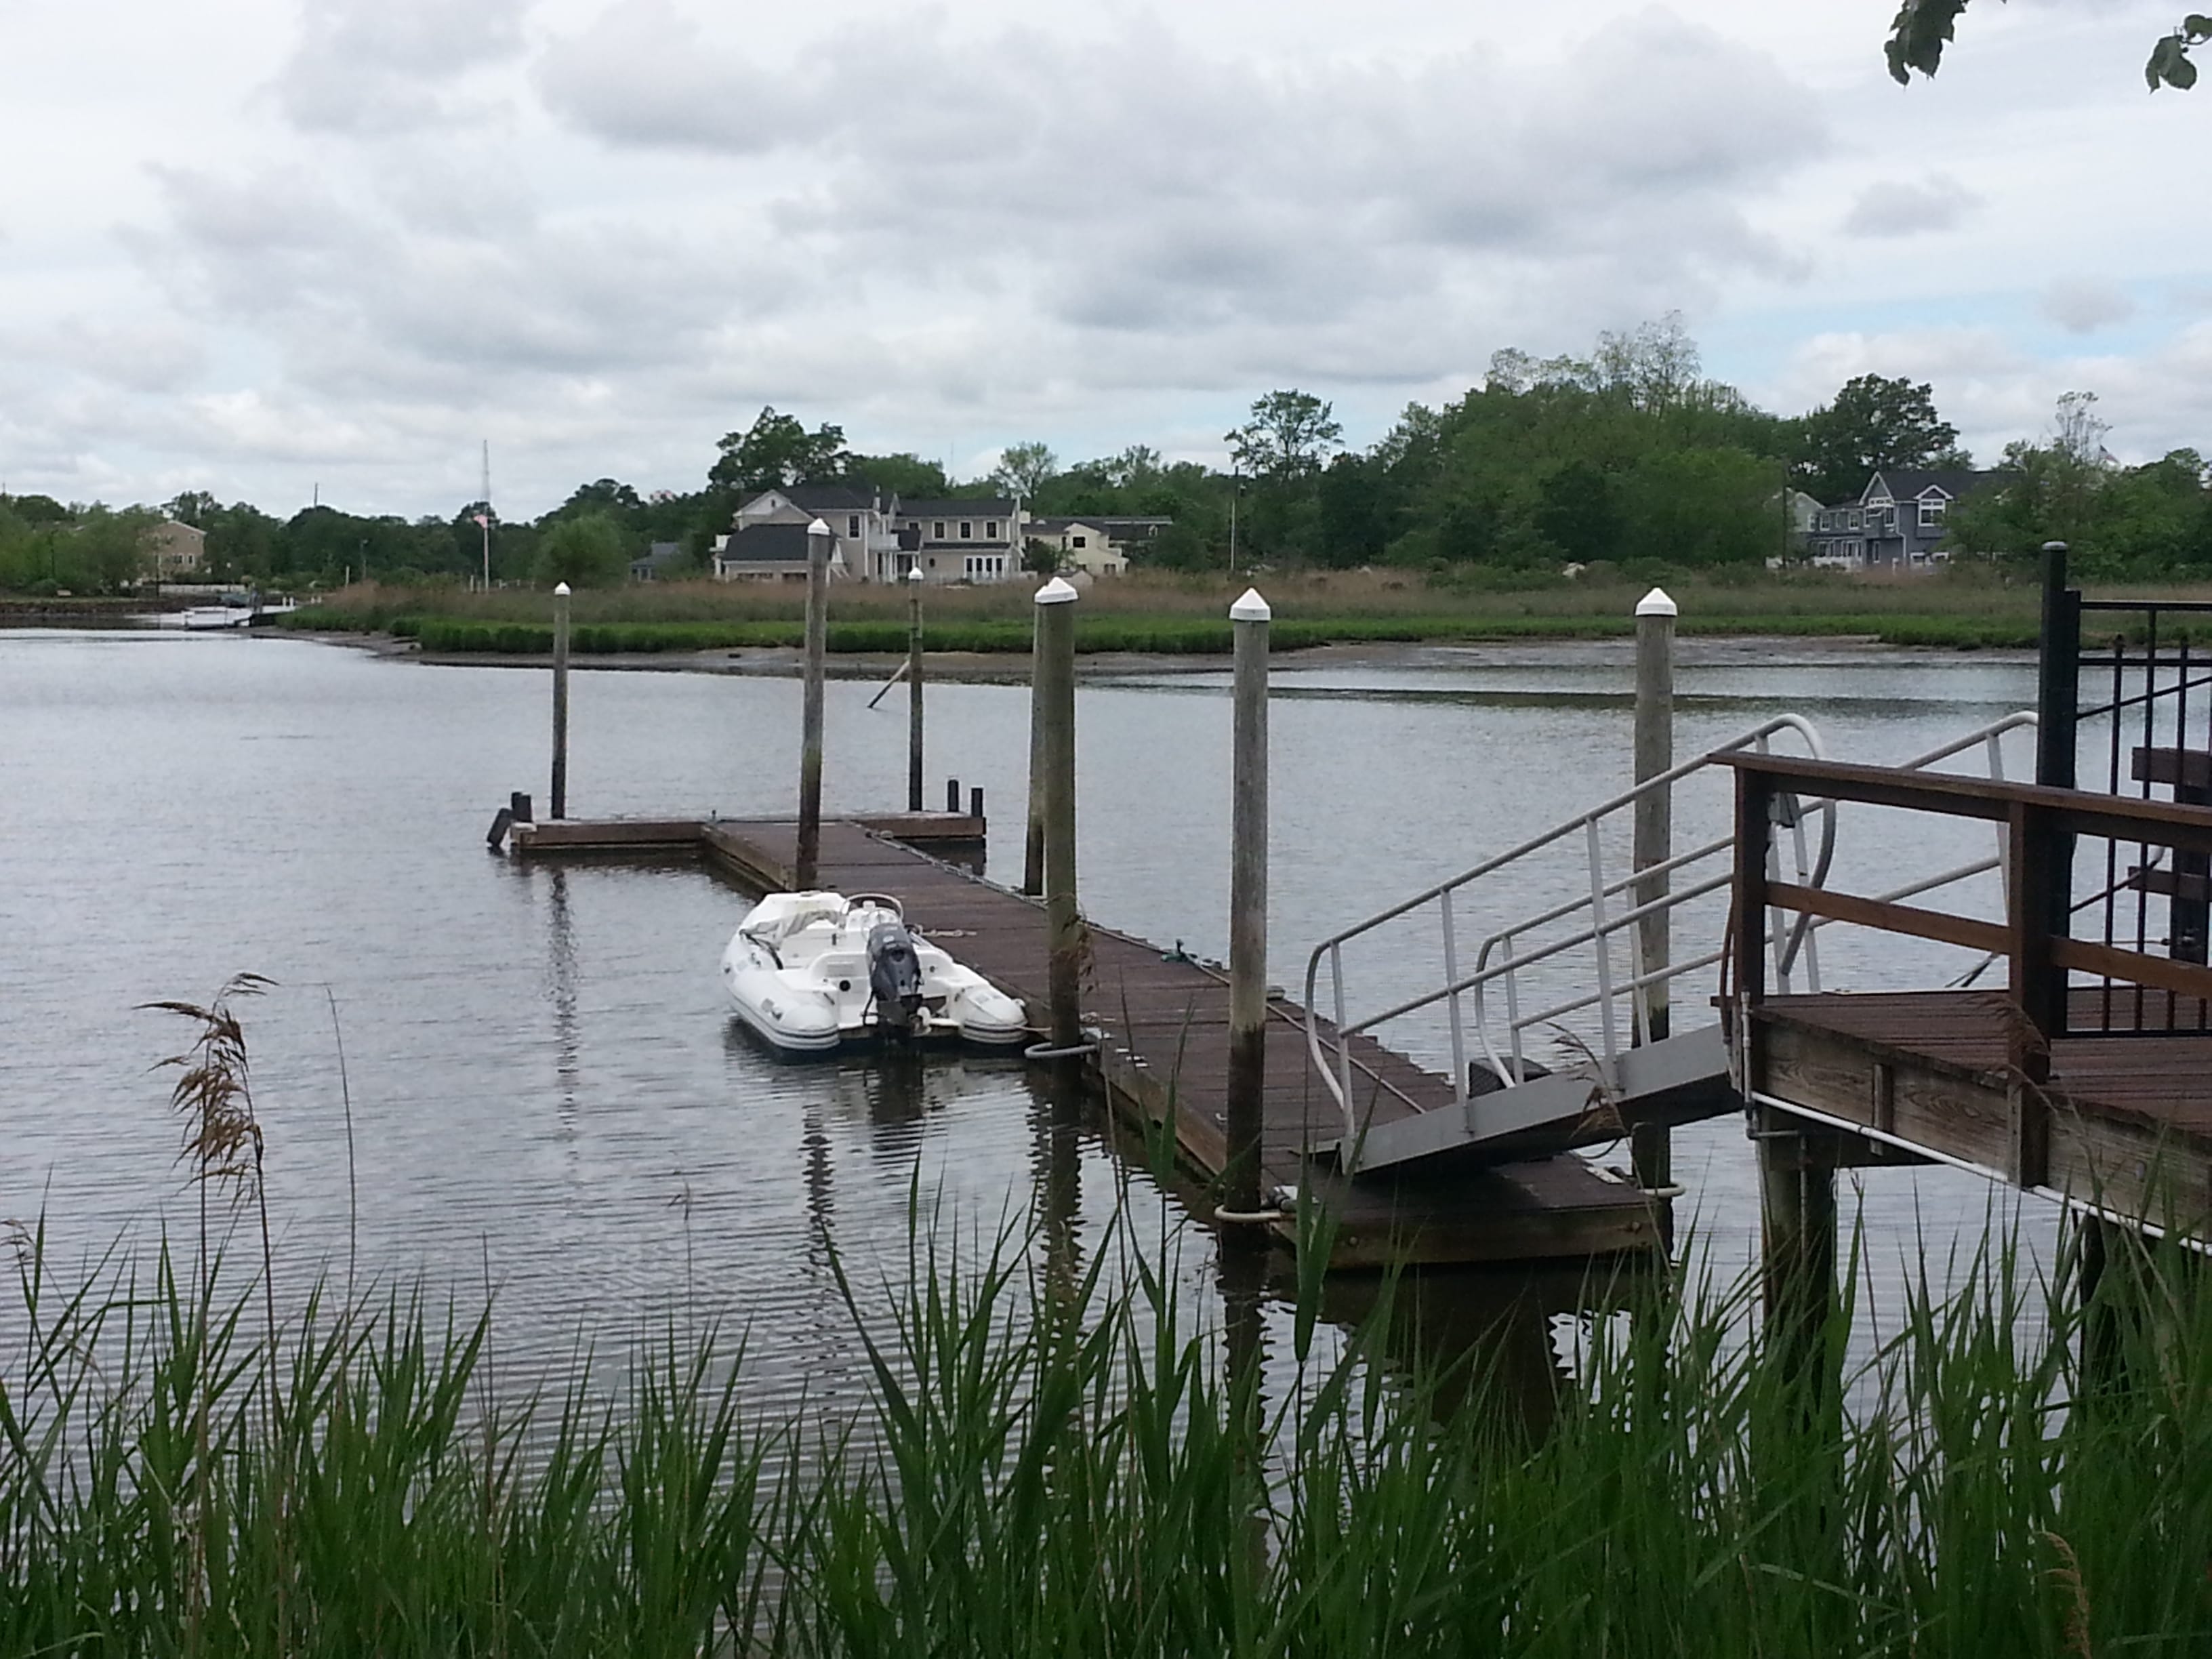 Bridgewaters has a community dock where residents can moor a boat.